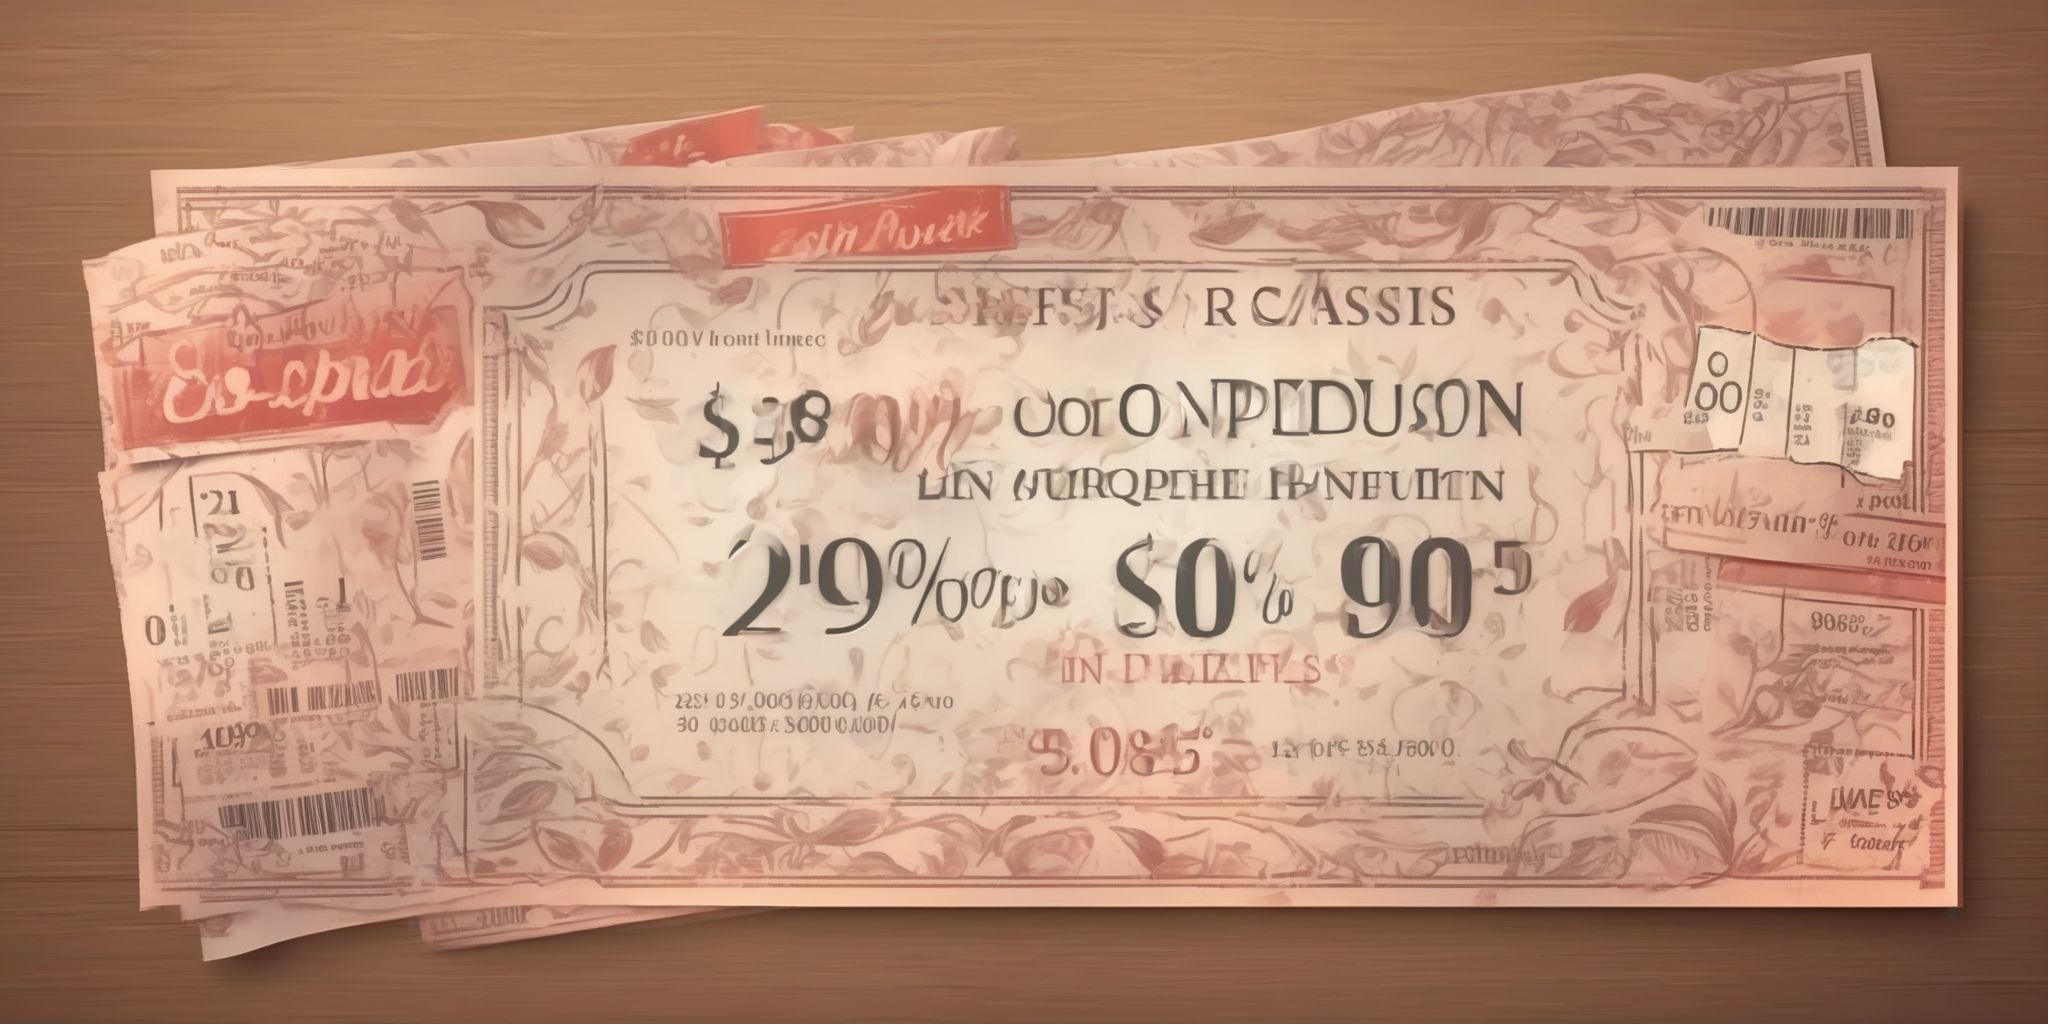 Coupon  in realistic, photographic style